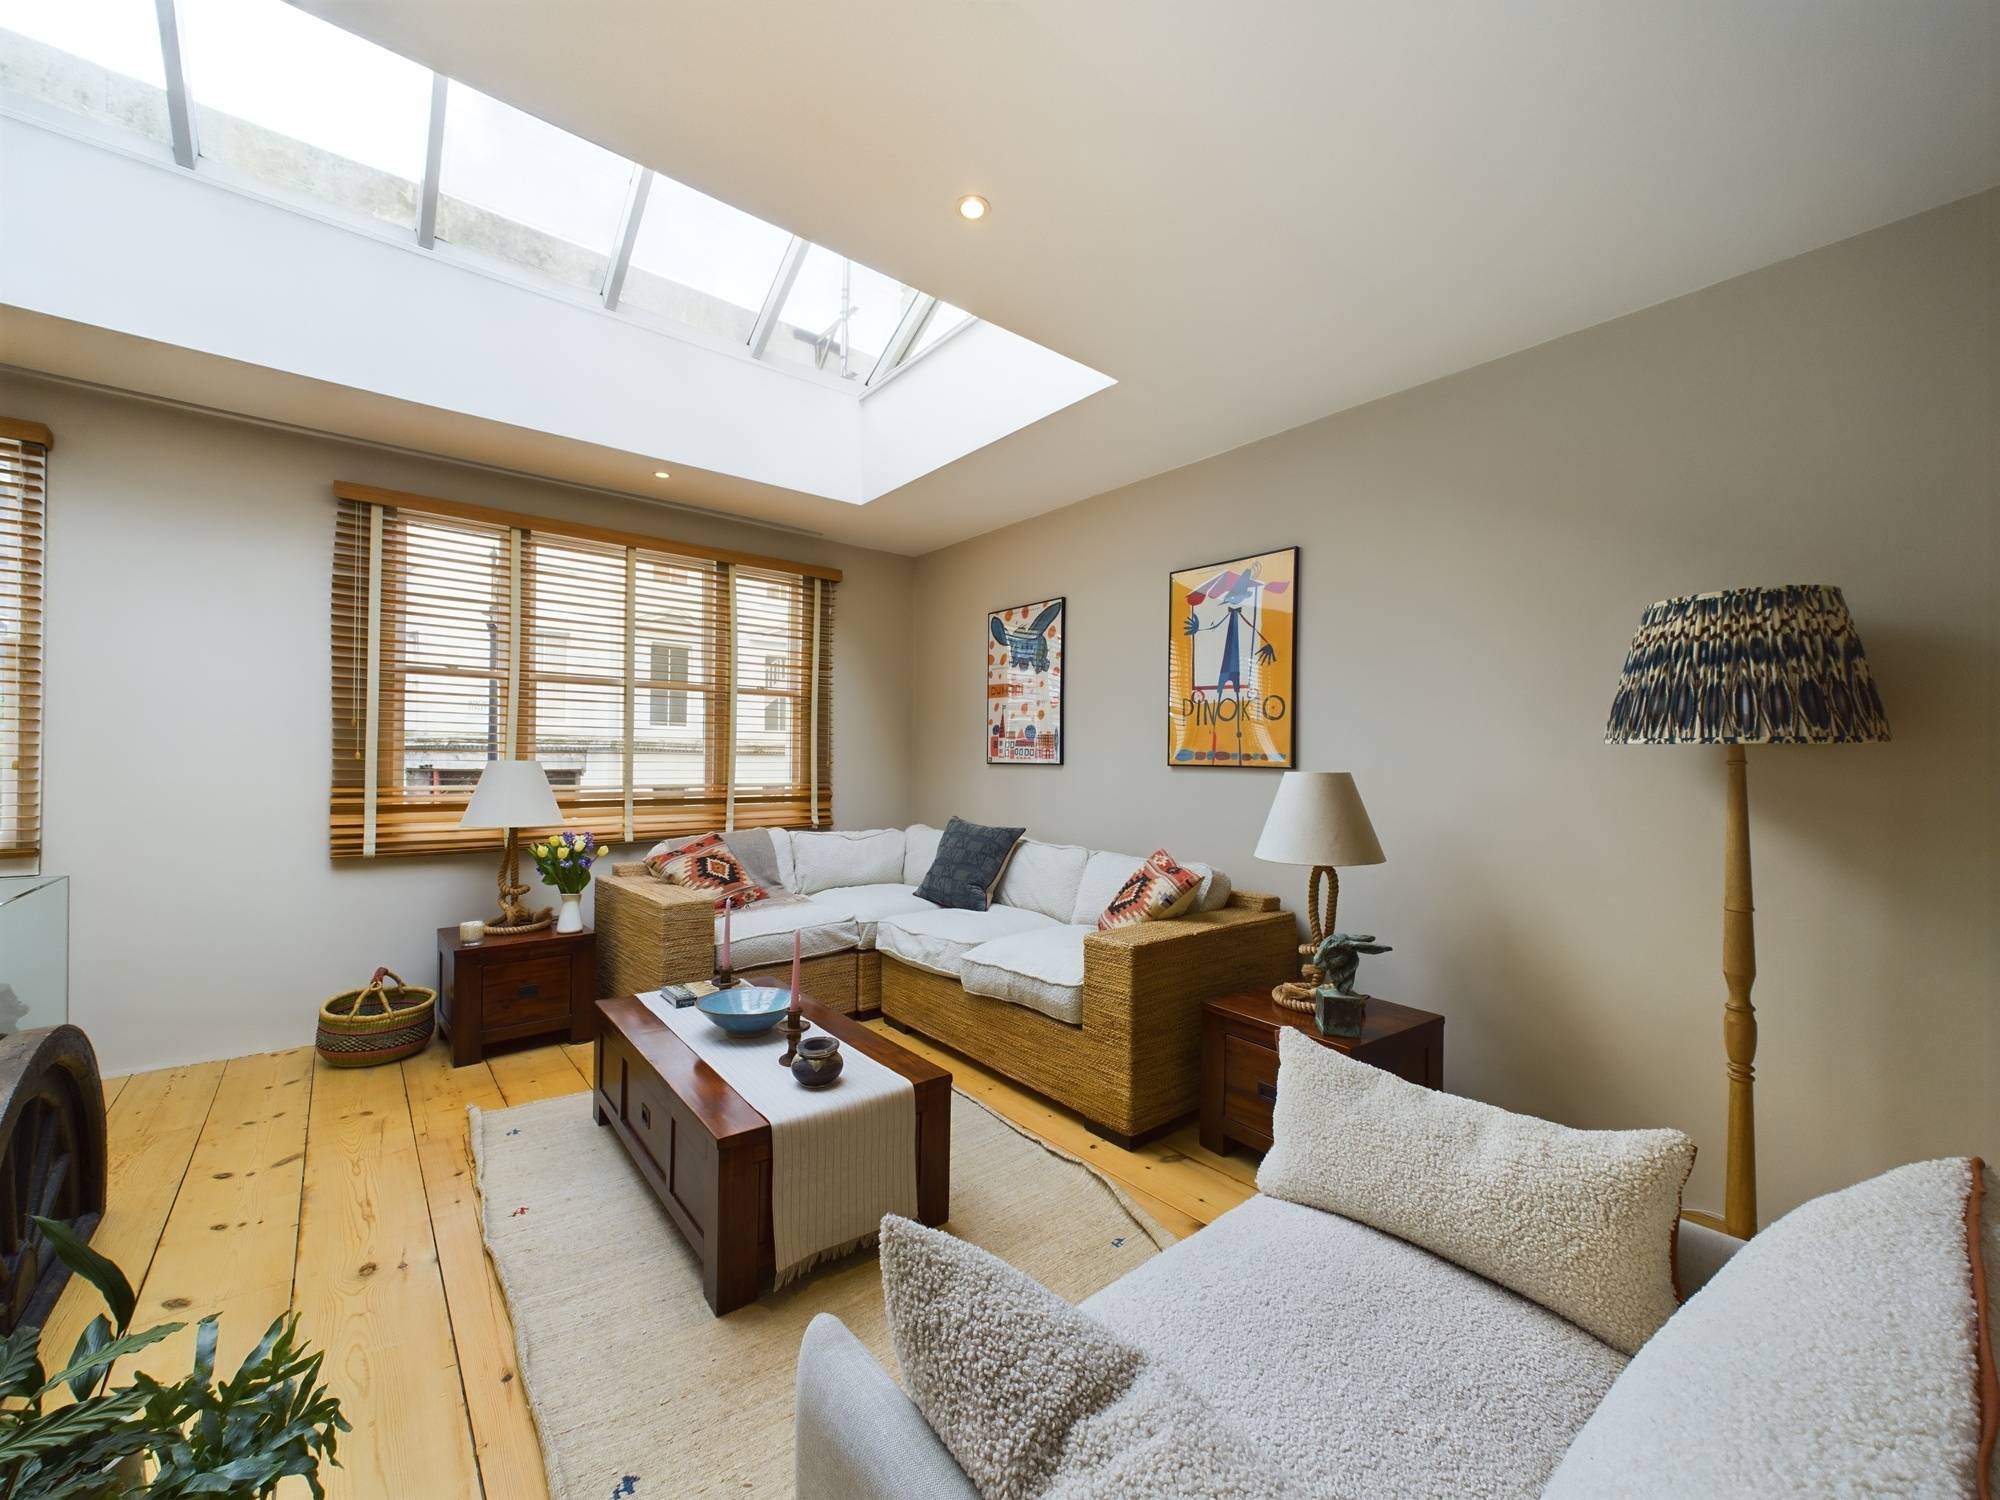 Be Ready to Fall in Love with this Unique Two-Bedroom House with Private Garden and Garage in Prime Central London